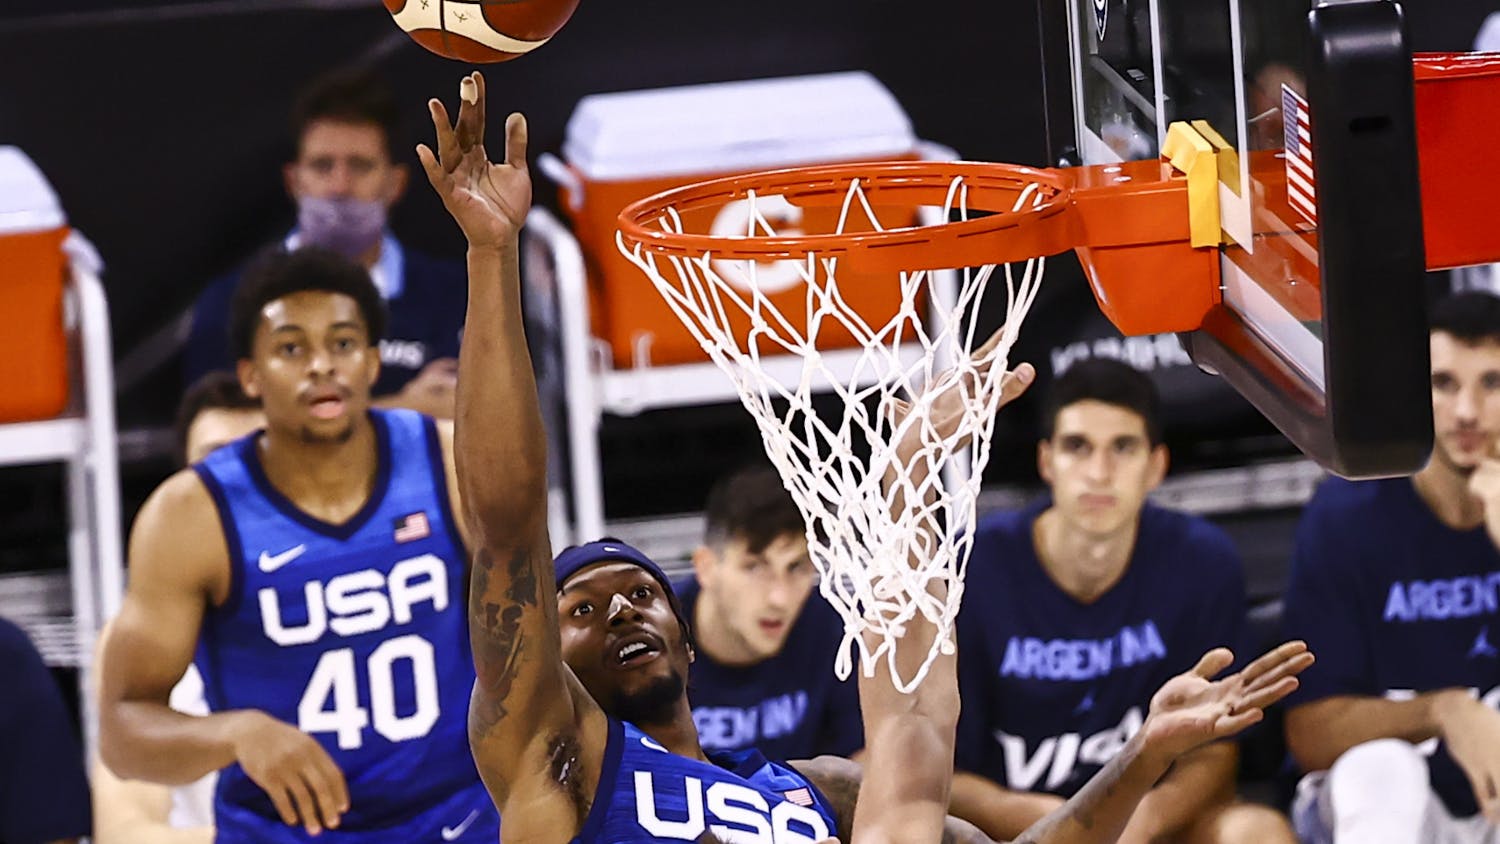 United States' Bradley Beal shoots around Argentina's Marcos Delia during the second half of an exhibition basketball game in Las Vegas on Tuesday, July 13, 2021. (Chase Stevens/Las Vegas Review-Journal via AP)